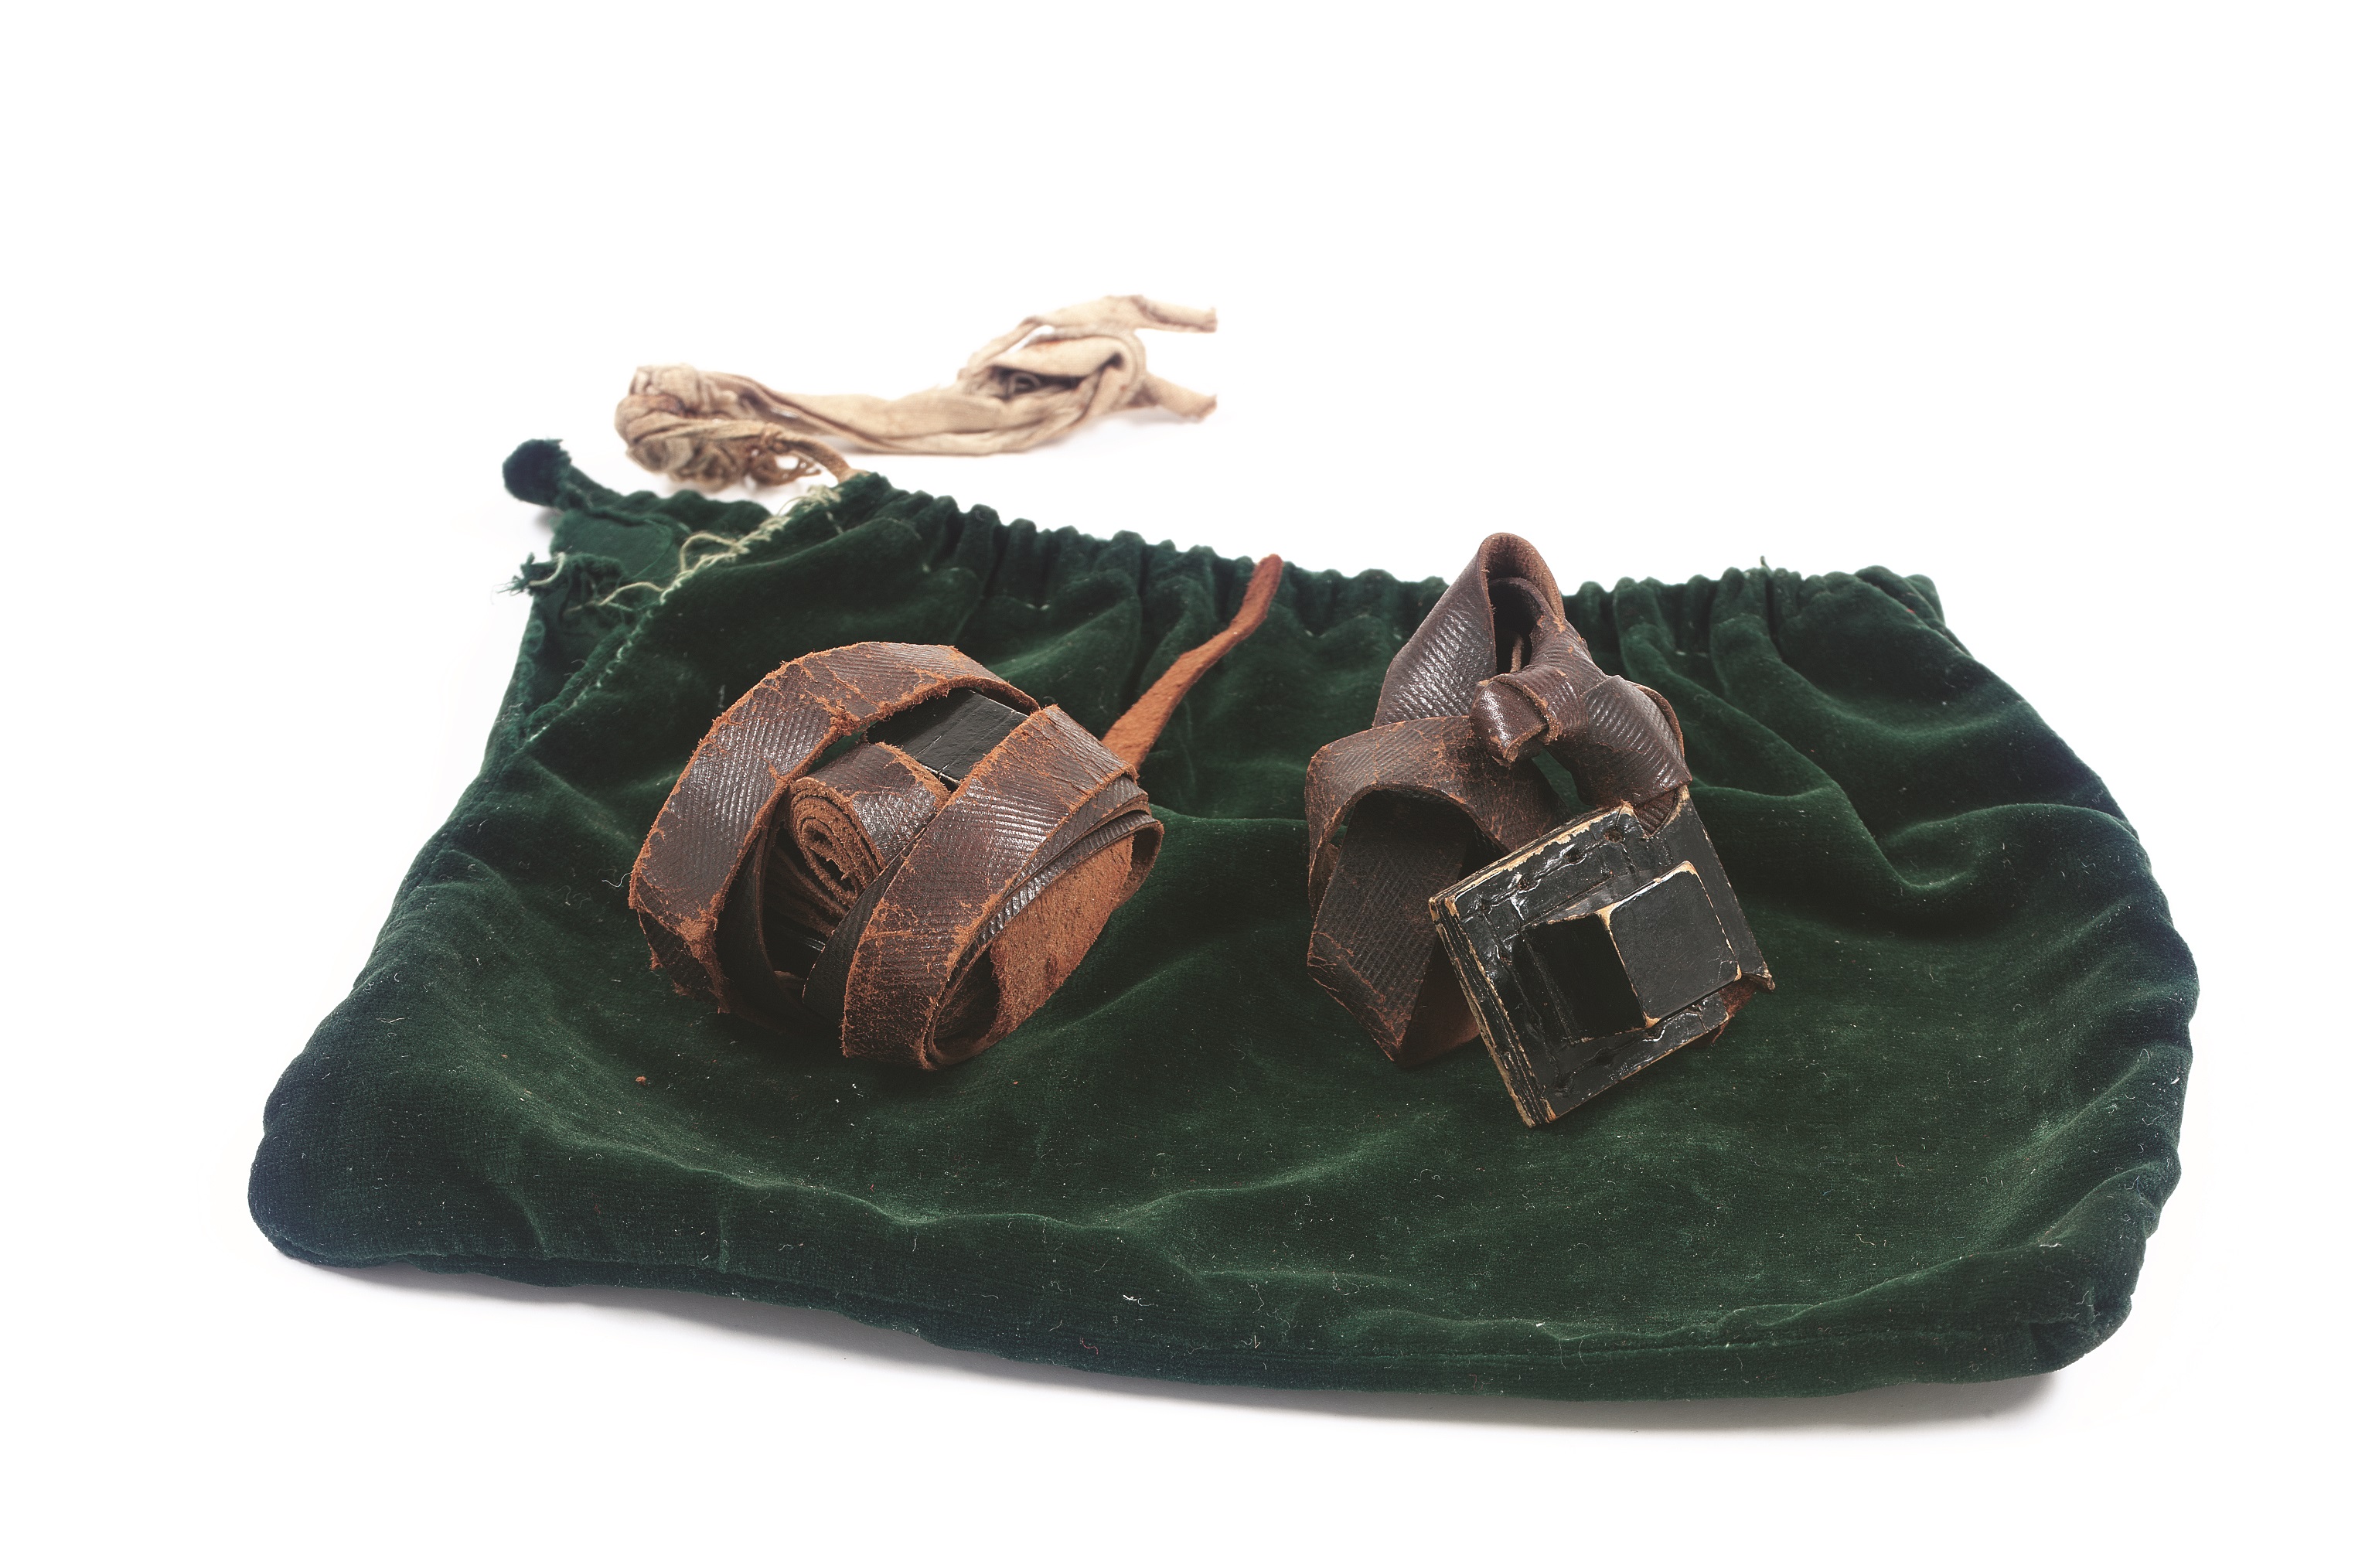 Pair of Tefillin , a Symbol of the Jewish People, a Pair of